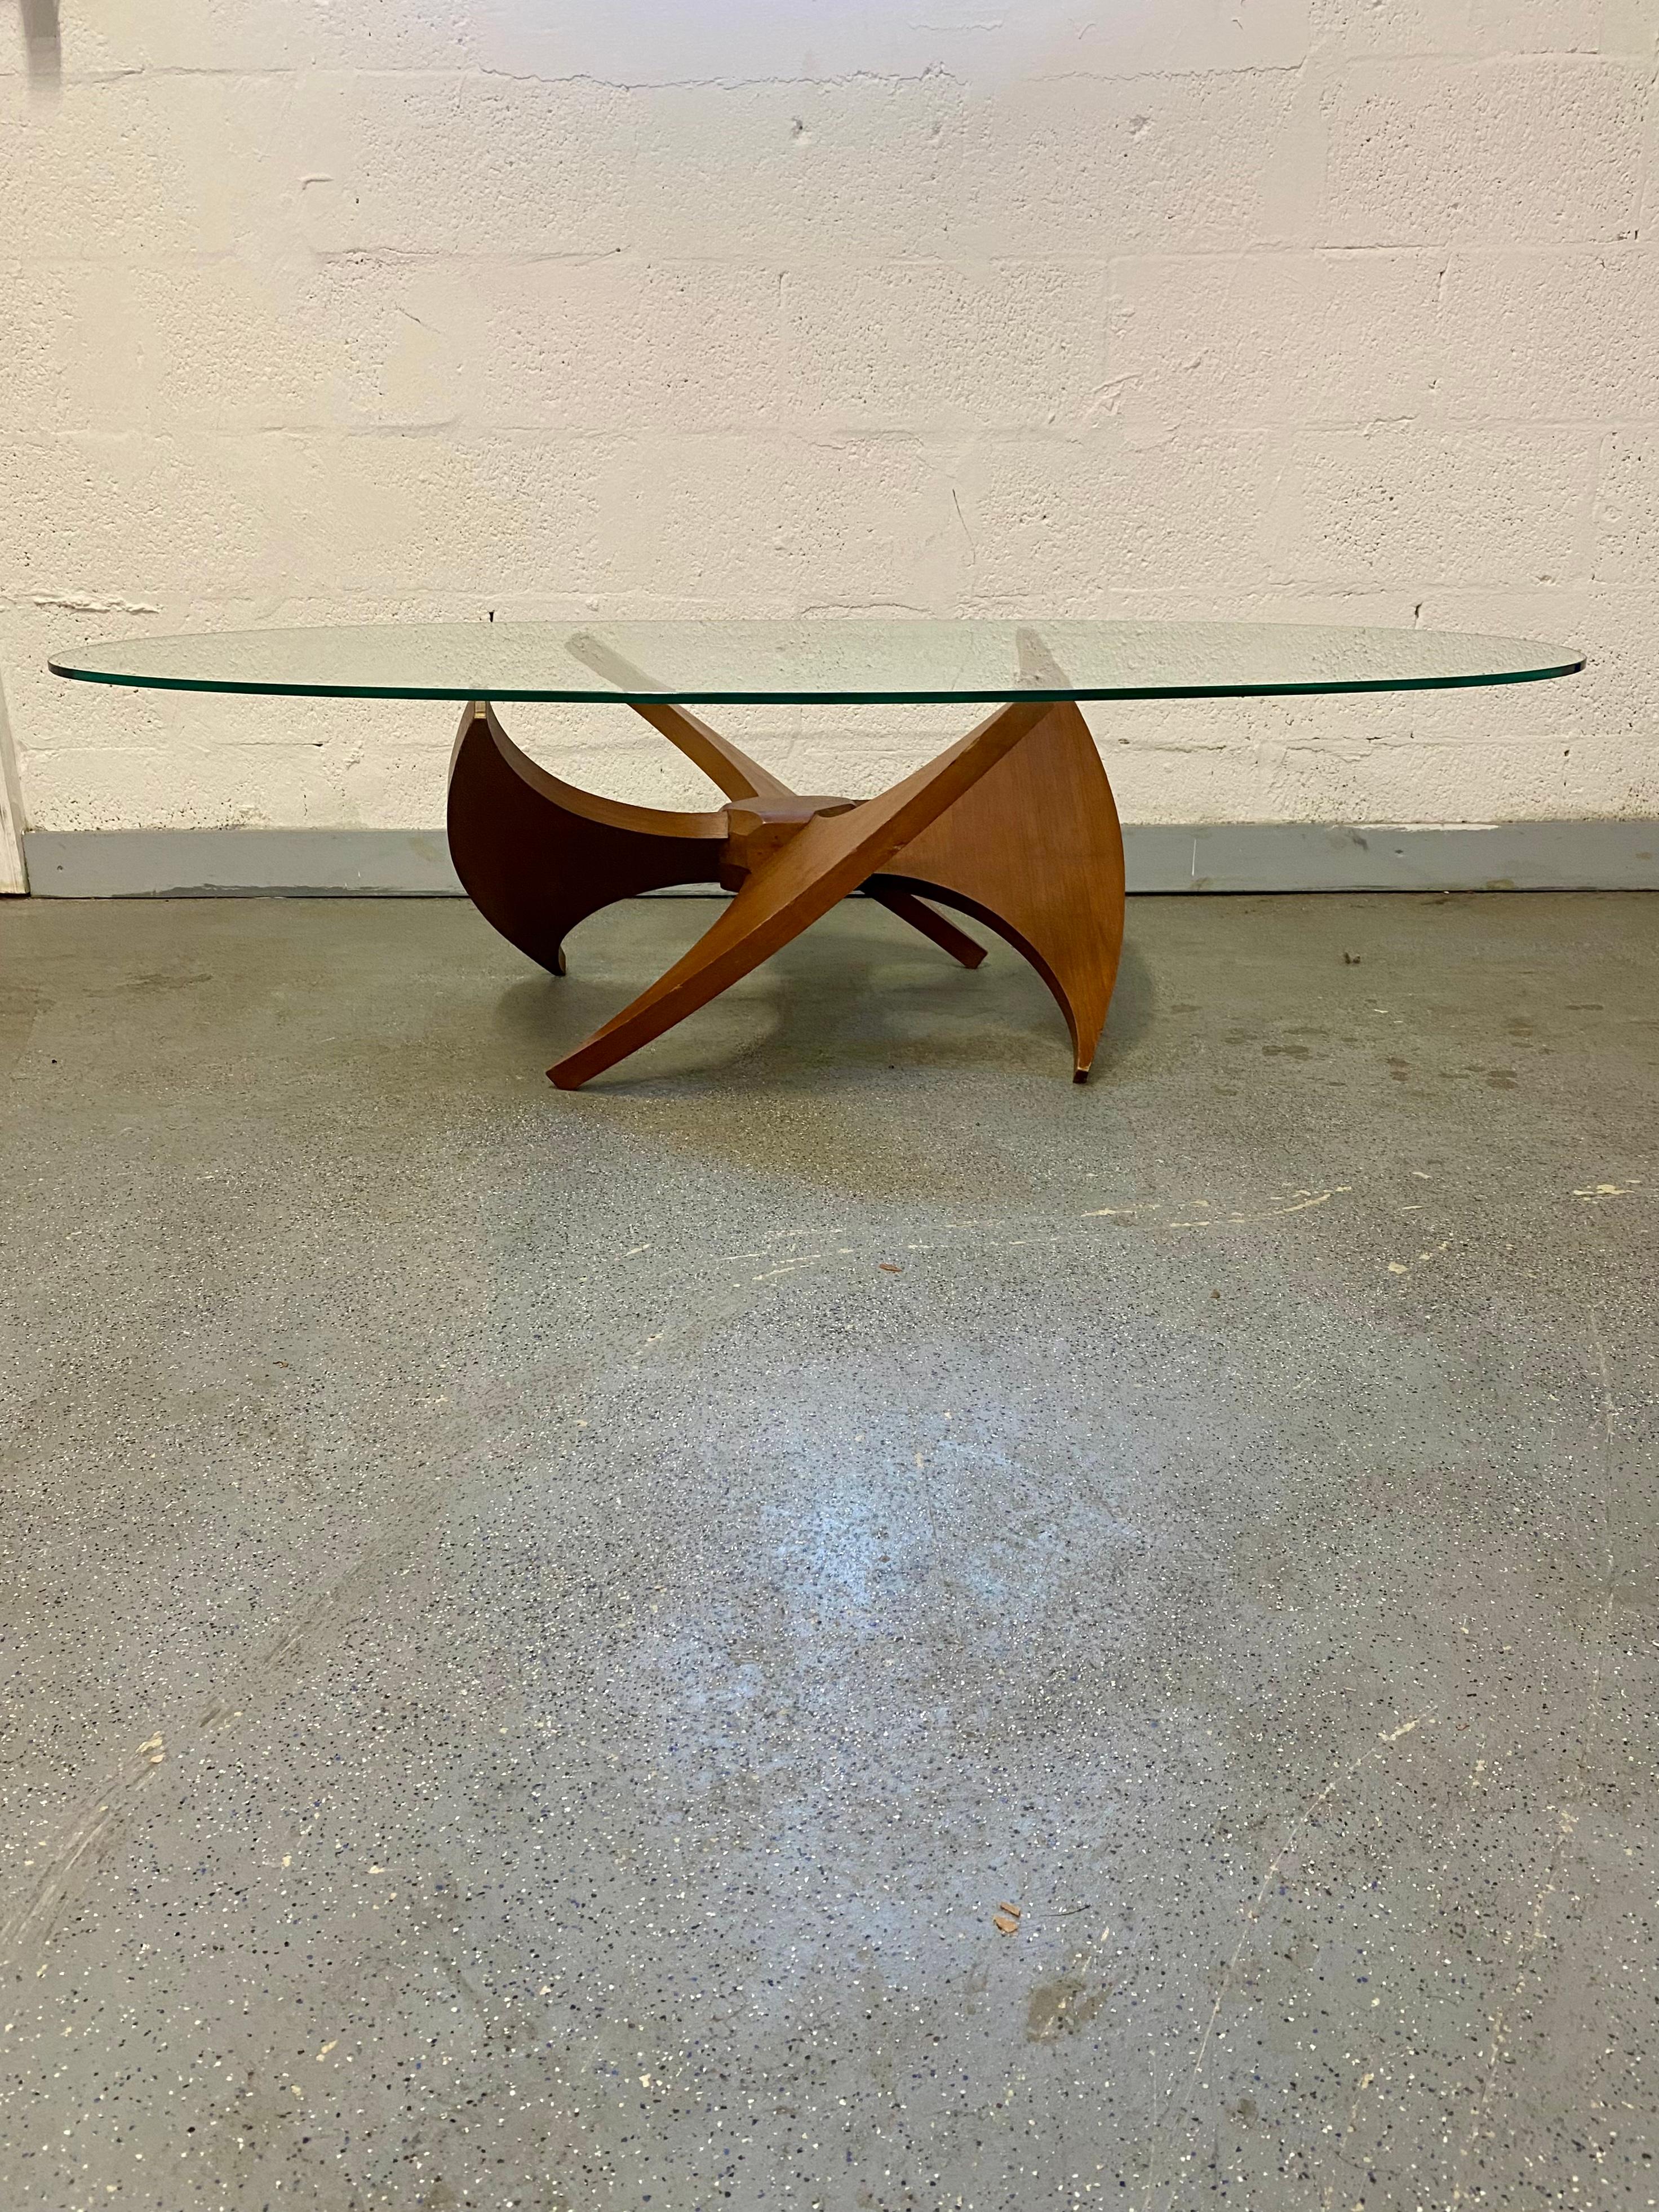 The beautiful rare table is statement piece which is also extremely comfortable and packed with personality! We are delighted to offer for sale this absolutely stunning table. Just look at the gorgeous sculptural details on this beauty! The table is